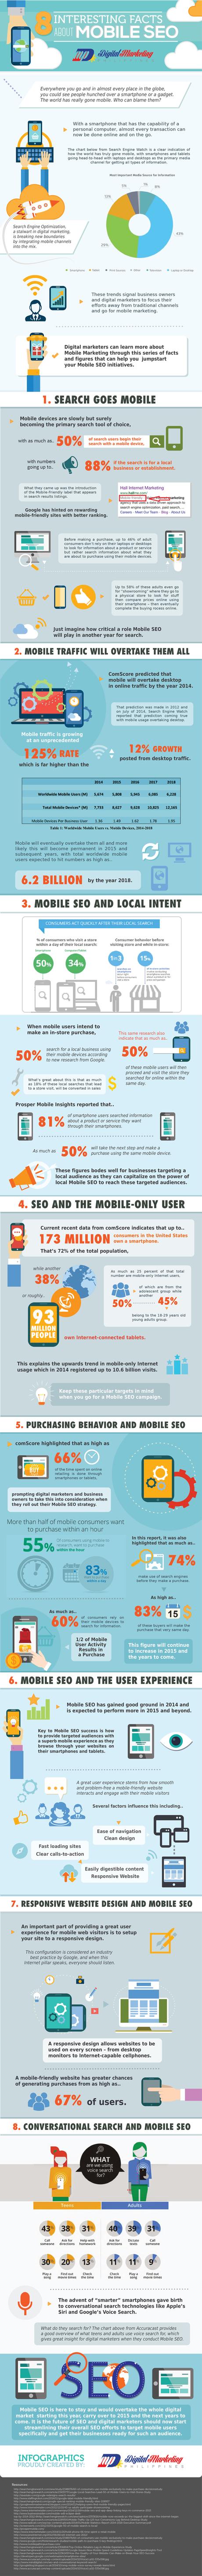 8 Interesting Facts about Mobile SEO (Infographic) - An Infographic from Digital Marketing Philippines